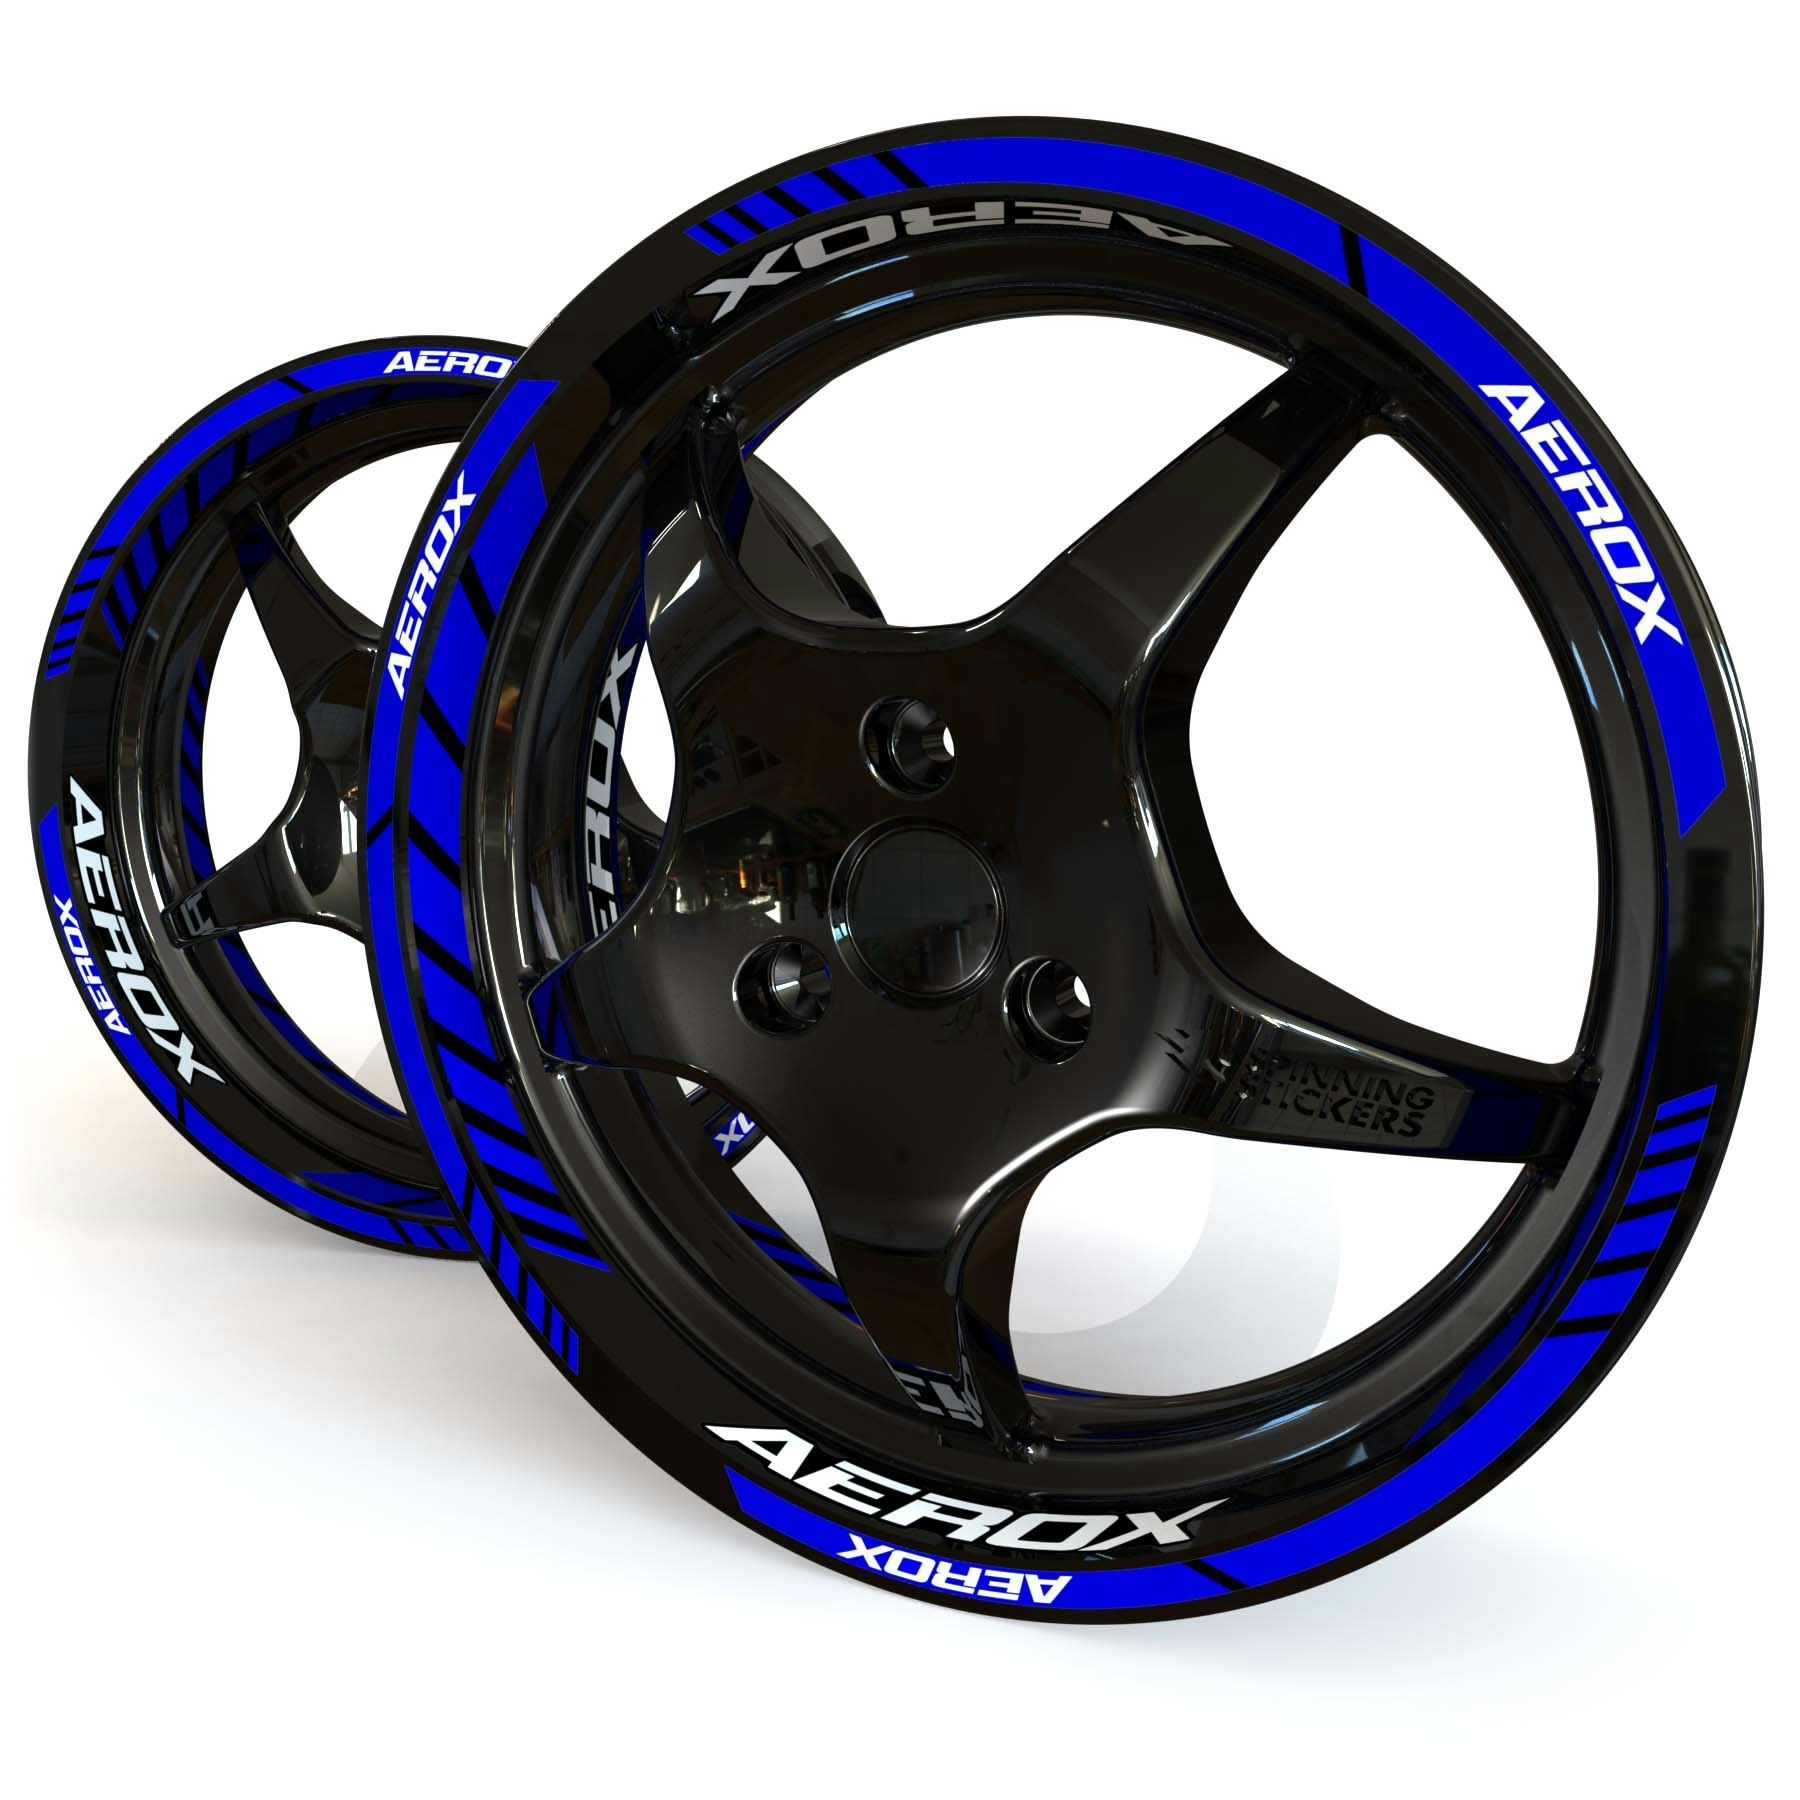 Blue and white Yamaha Aerox wheel stickers on a black 12 inch moped rim